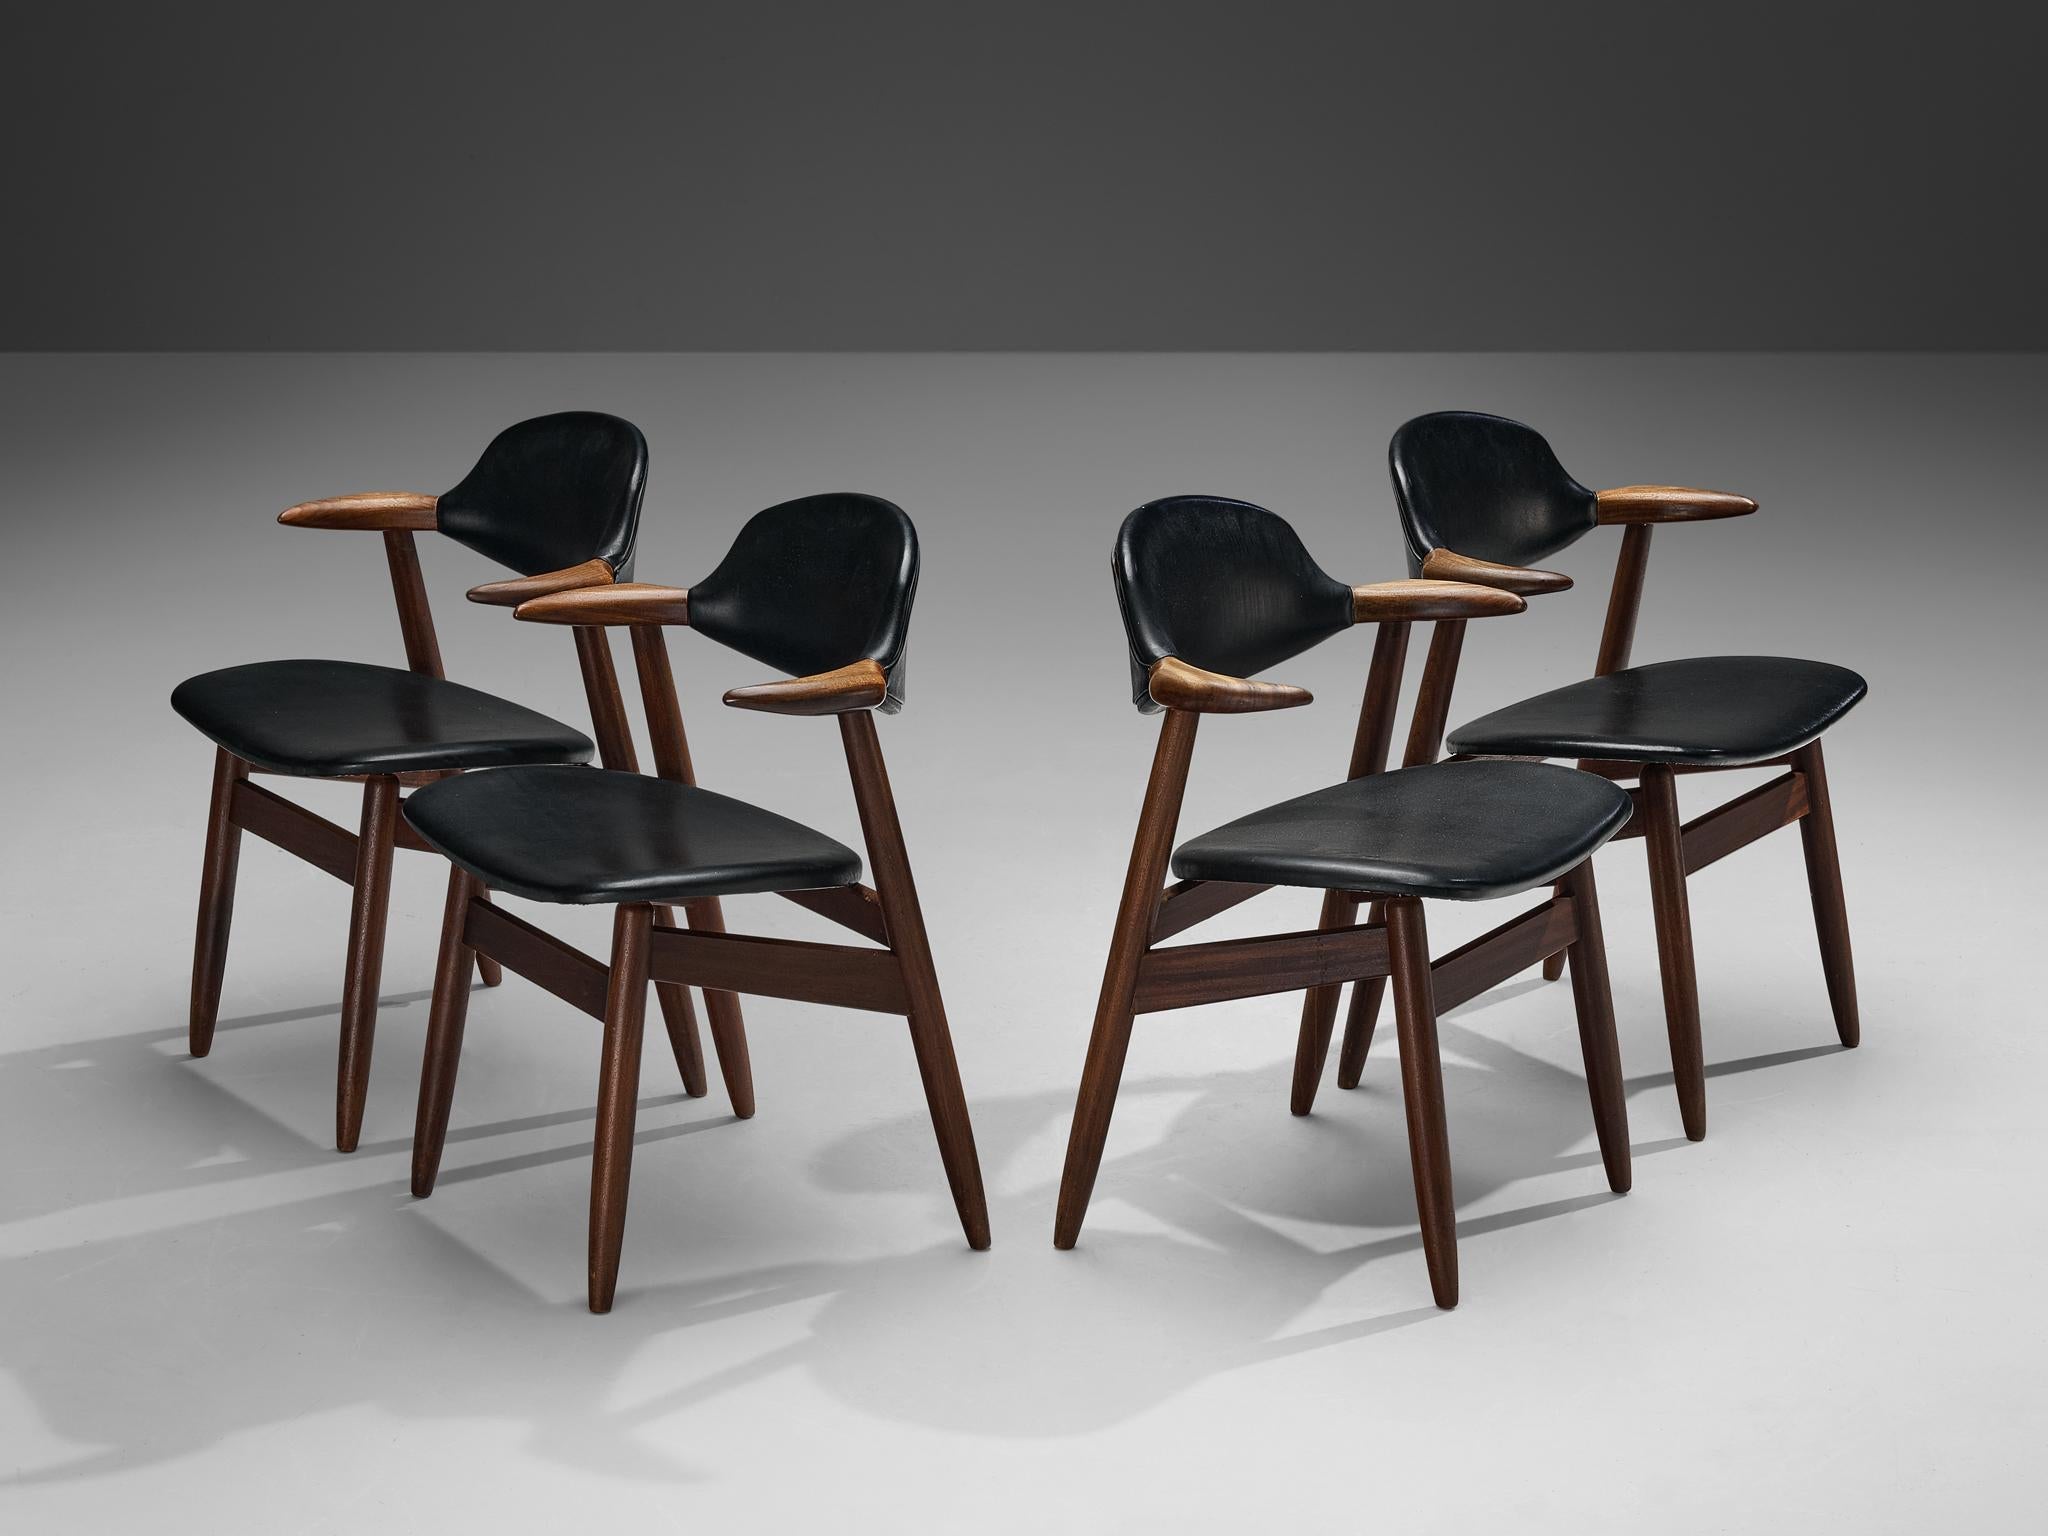 ‘Bullhorn’ Armchairs in Teak and Black Upholstery